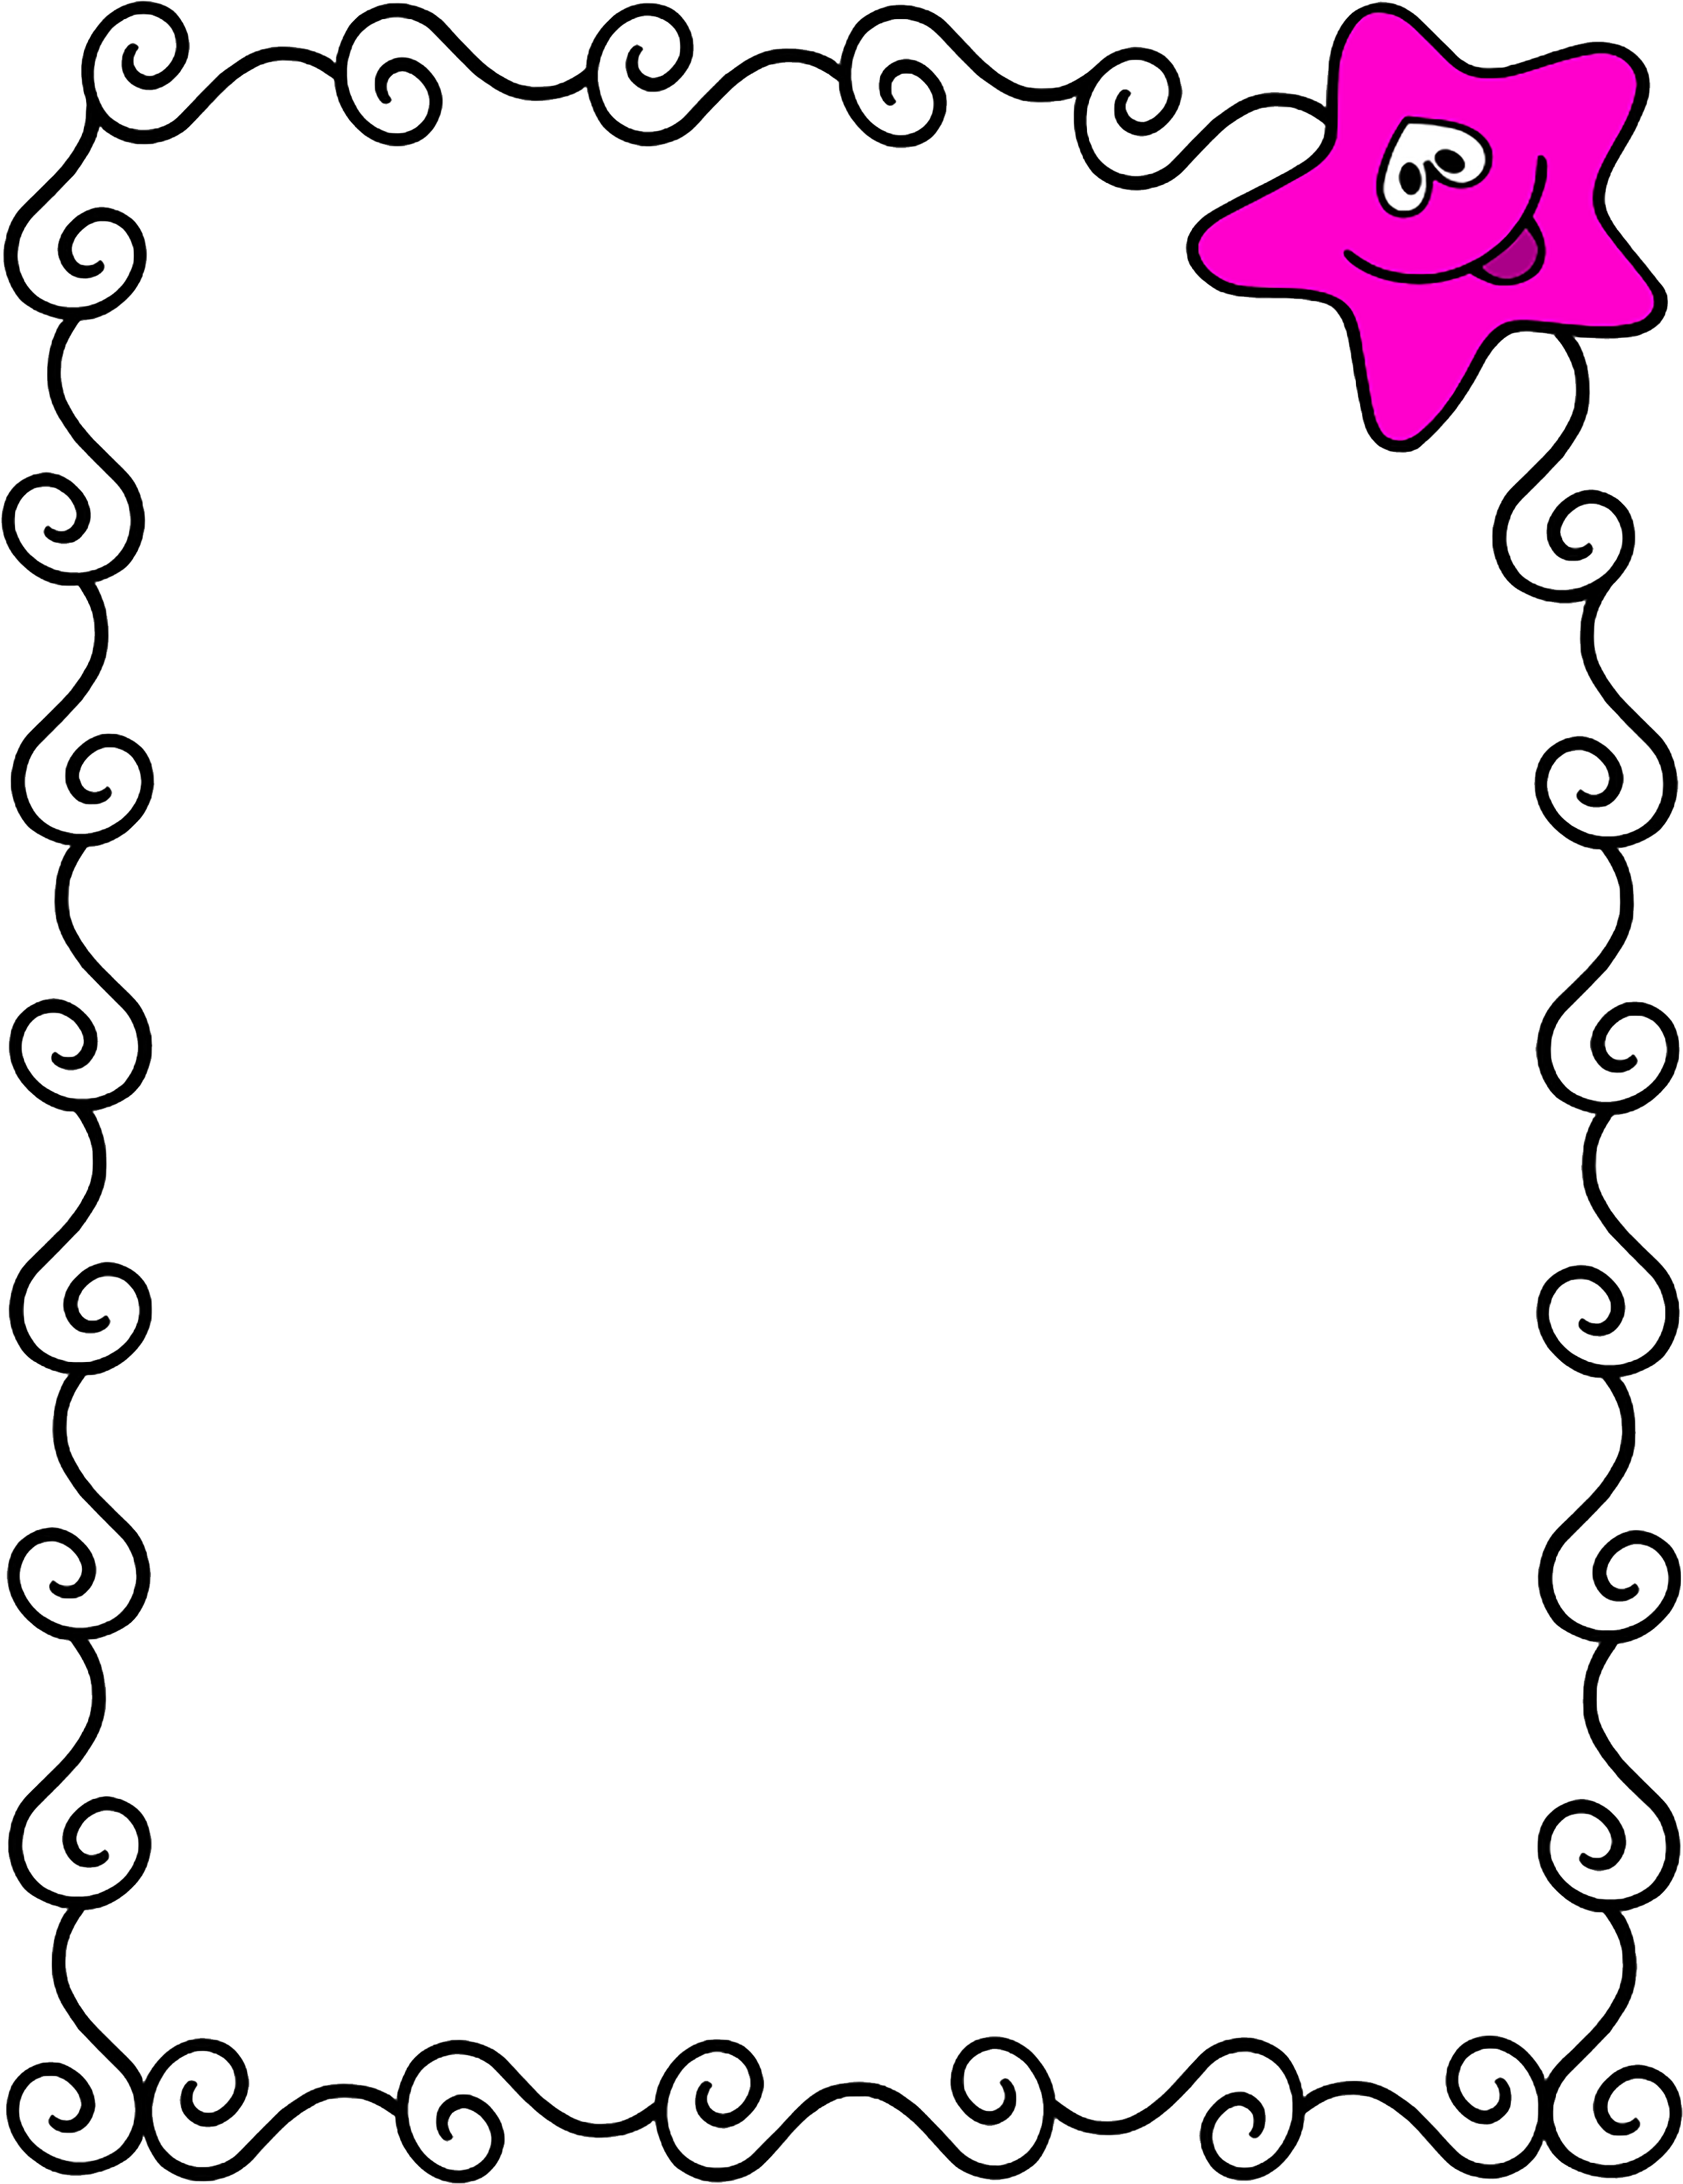 *✿**✿*frame*✿**✿* - Borders And Frames For Kids Clipart (2550x3300)